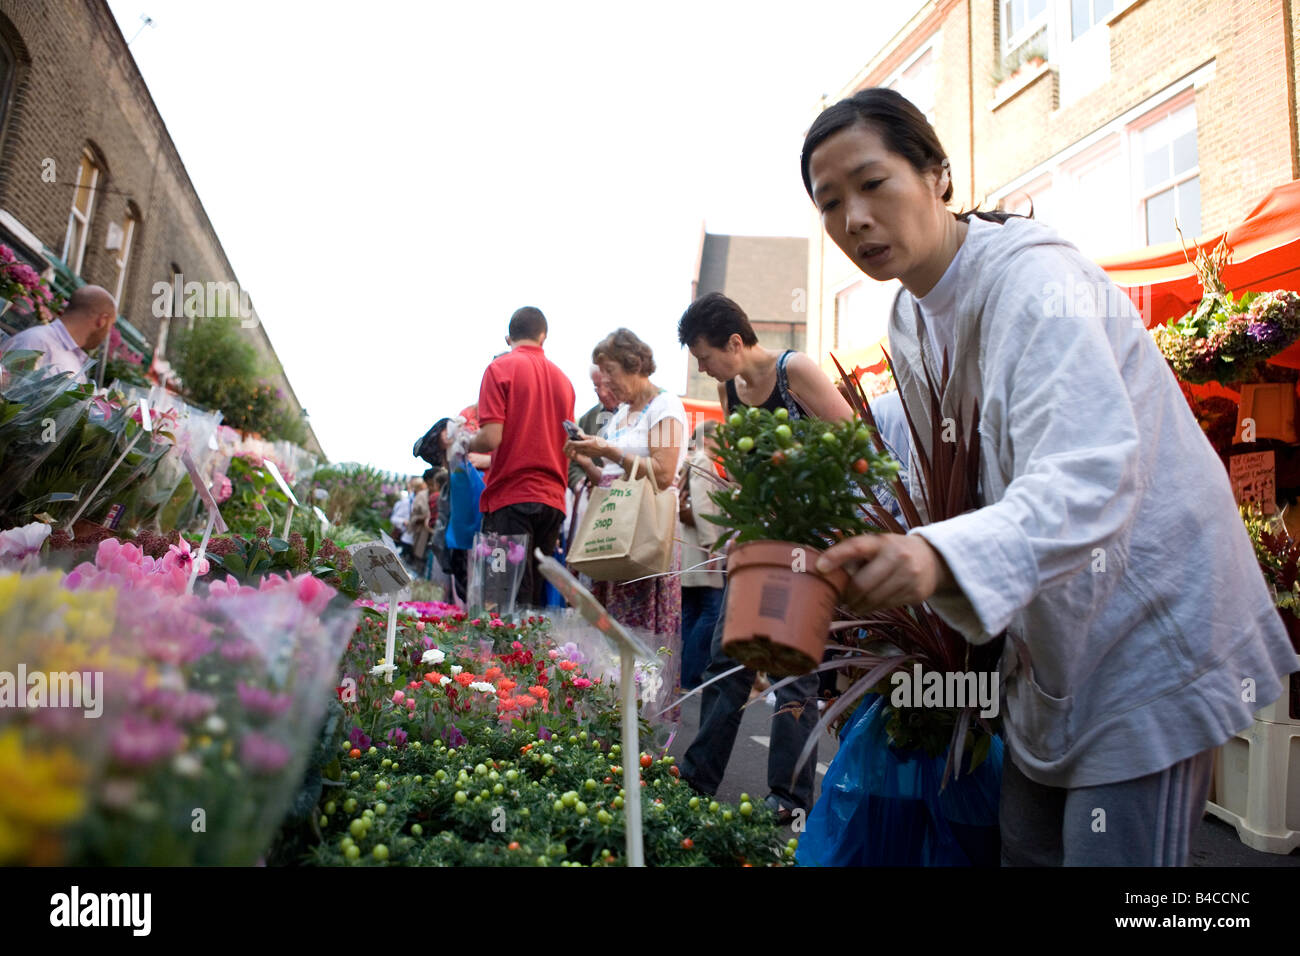 Colombia Road flower market on a Sunday morning, Bethnal Green, East London Stock Photo